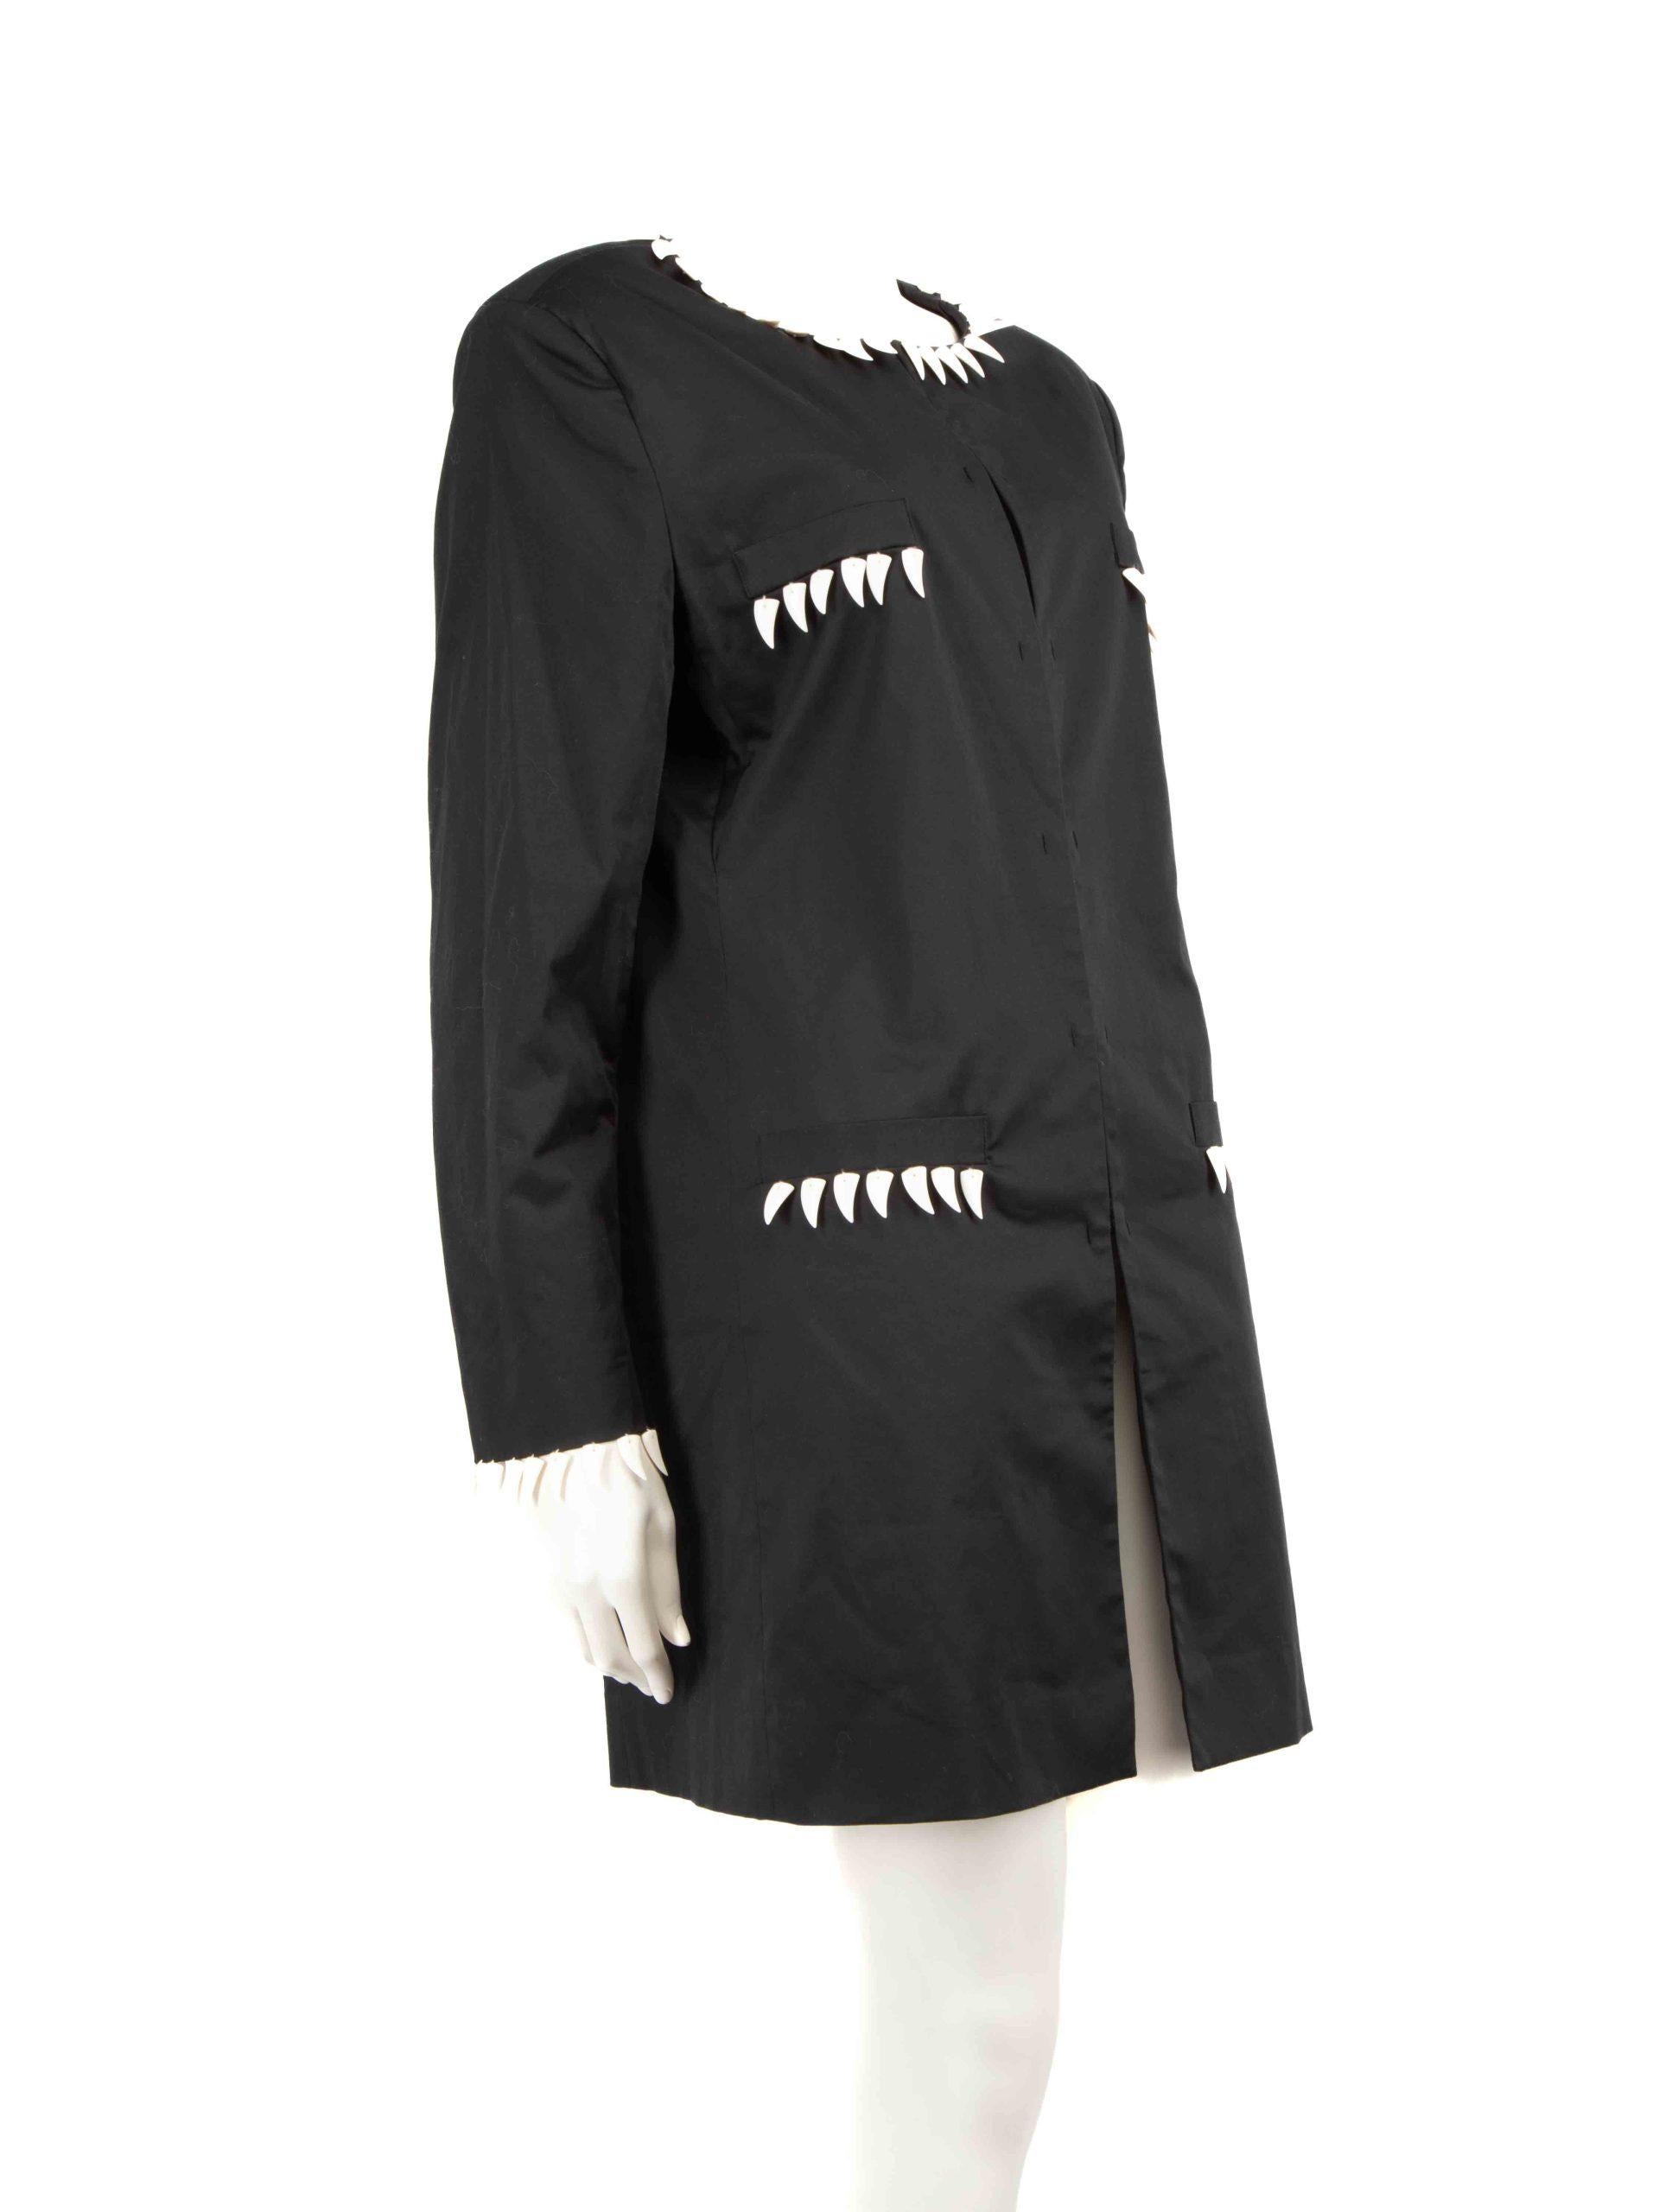 CONDITION is Very good. Hardly any visible wear to jacket is evident on this used Moschino Cheap & Chic designer resale item.
 
 
 
 Details
 
 
 Black
 
 Cotton
 
 Blazer
 
 Faux teeth embellishment
 
 Long sleeves
 
 Hook fastening
 
 Round neck
